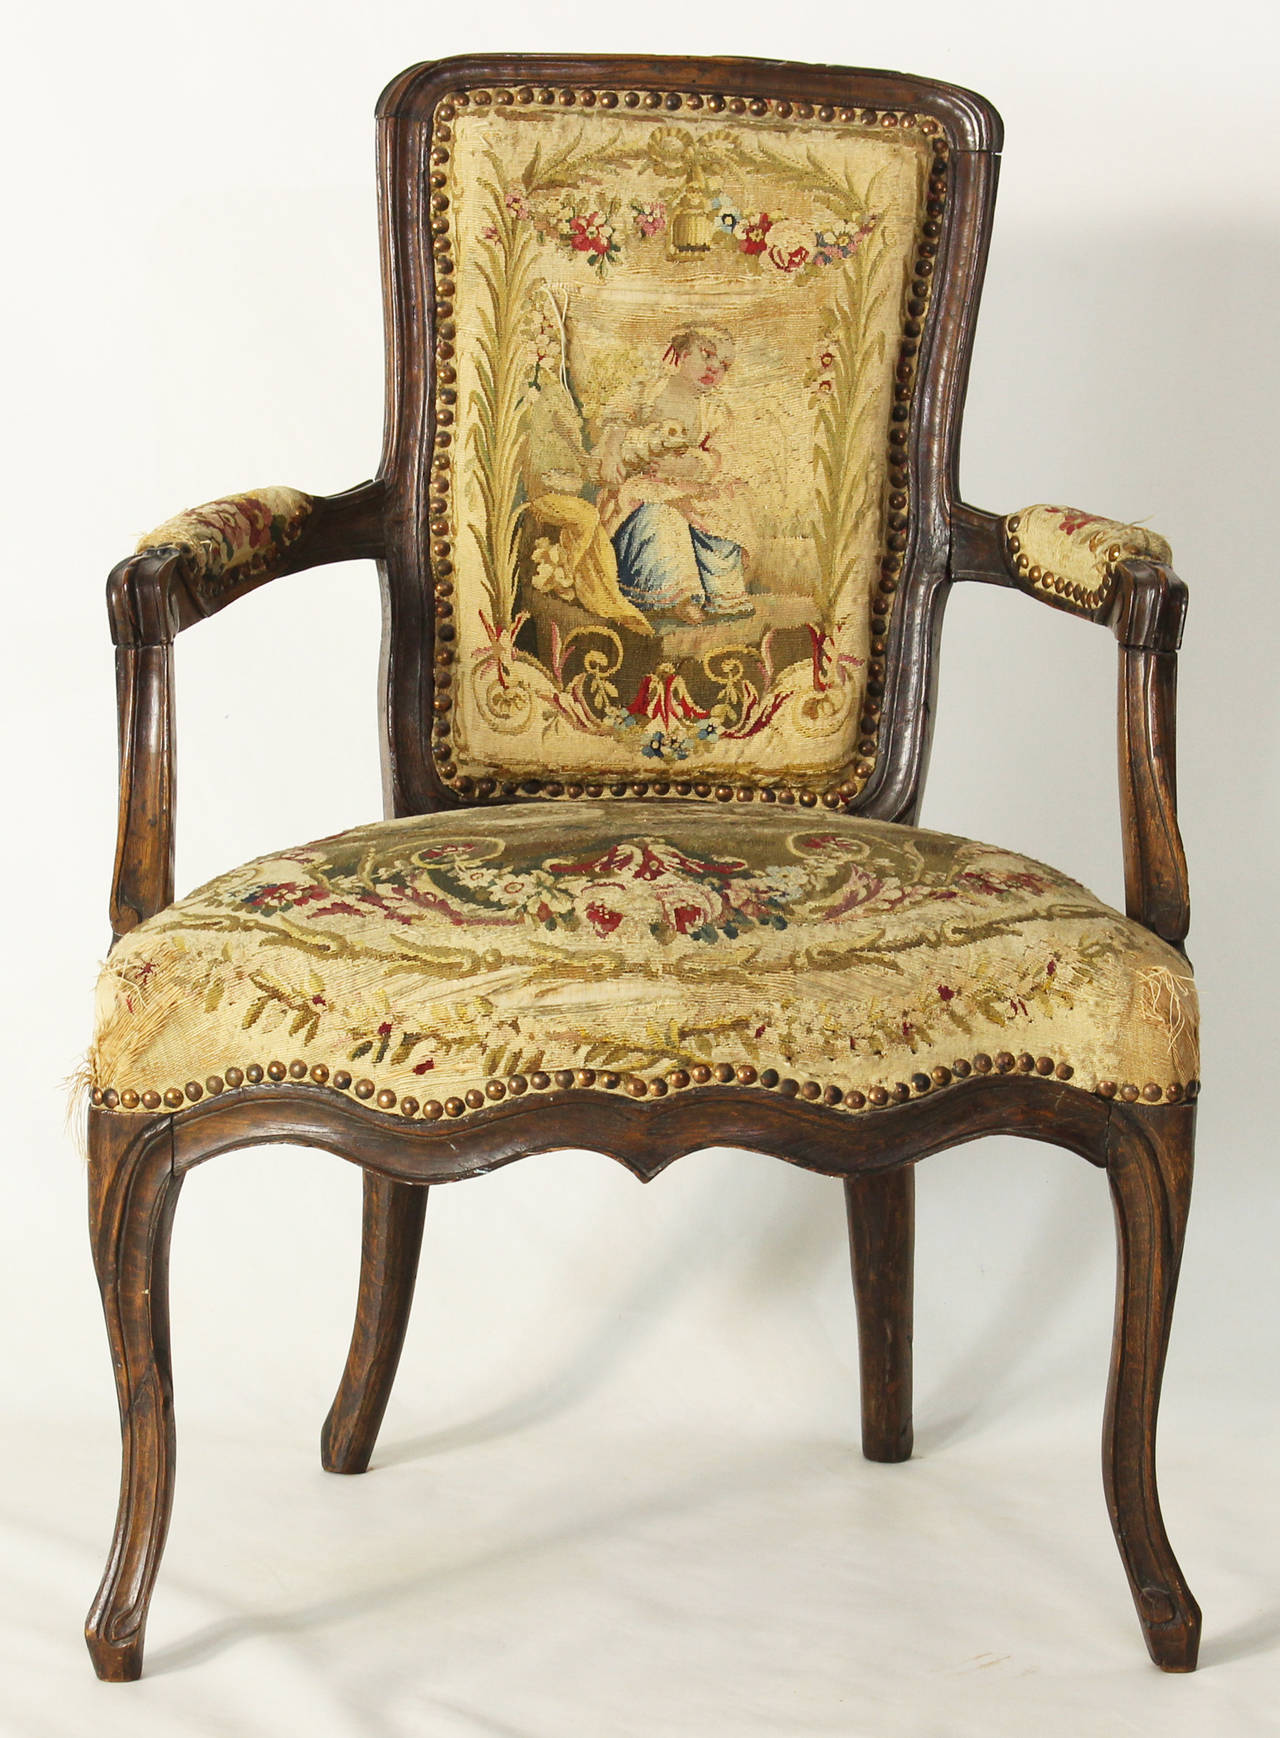 A charming late 18th century French provincial fauteuil retaining its original needlework upholstery and accented with brass nailheads.